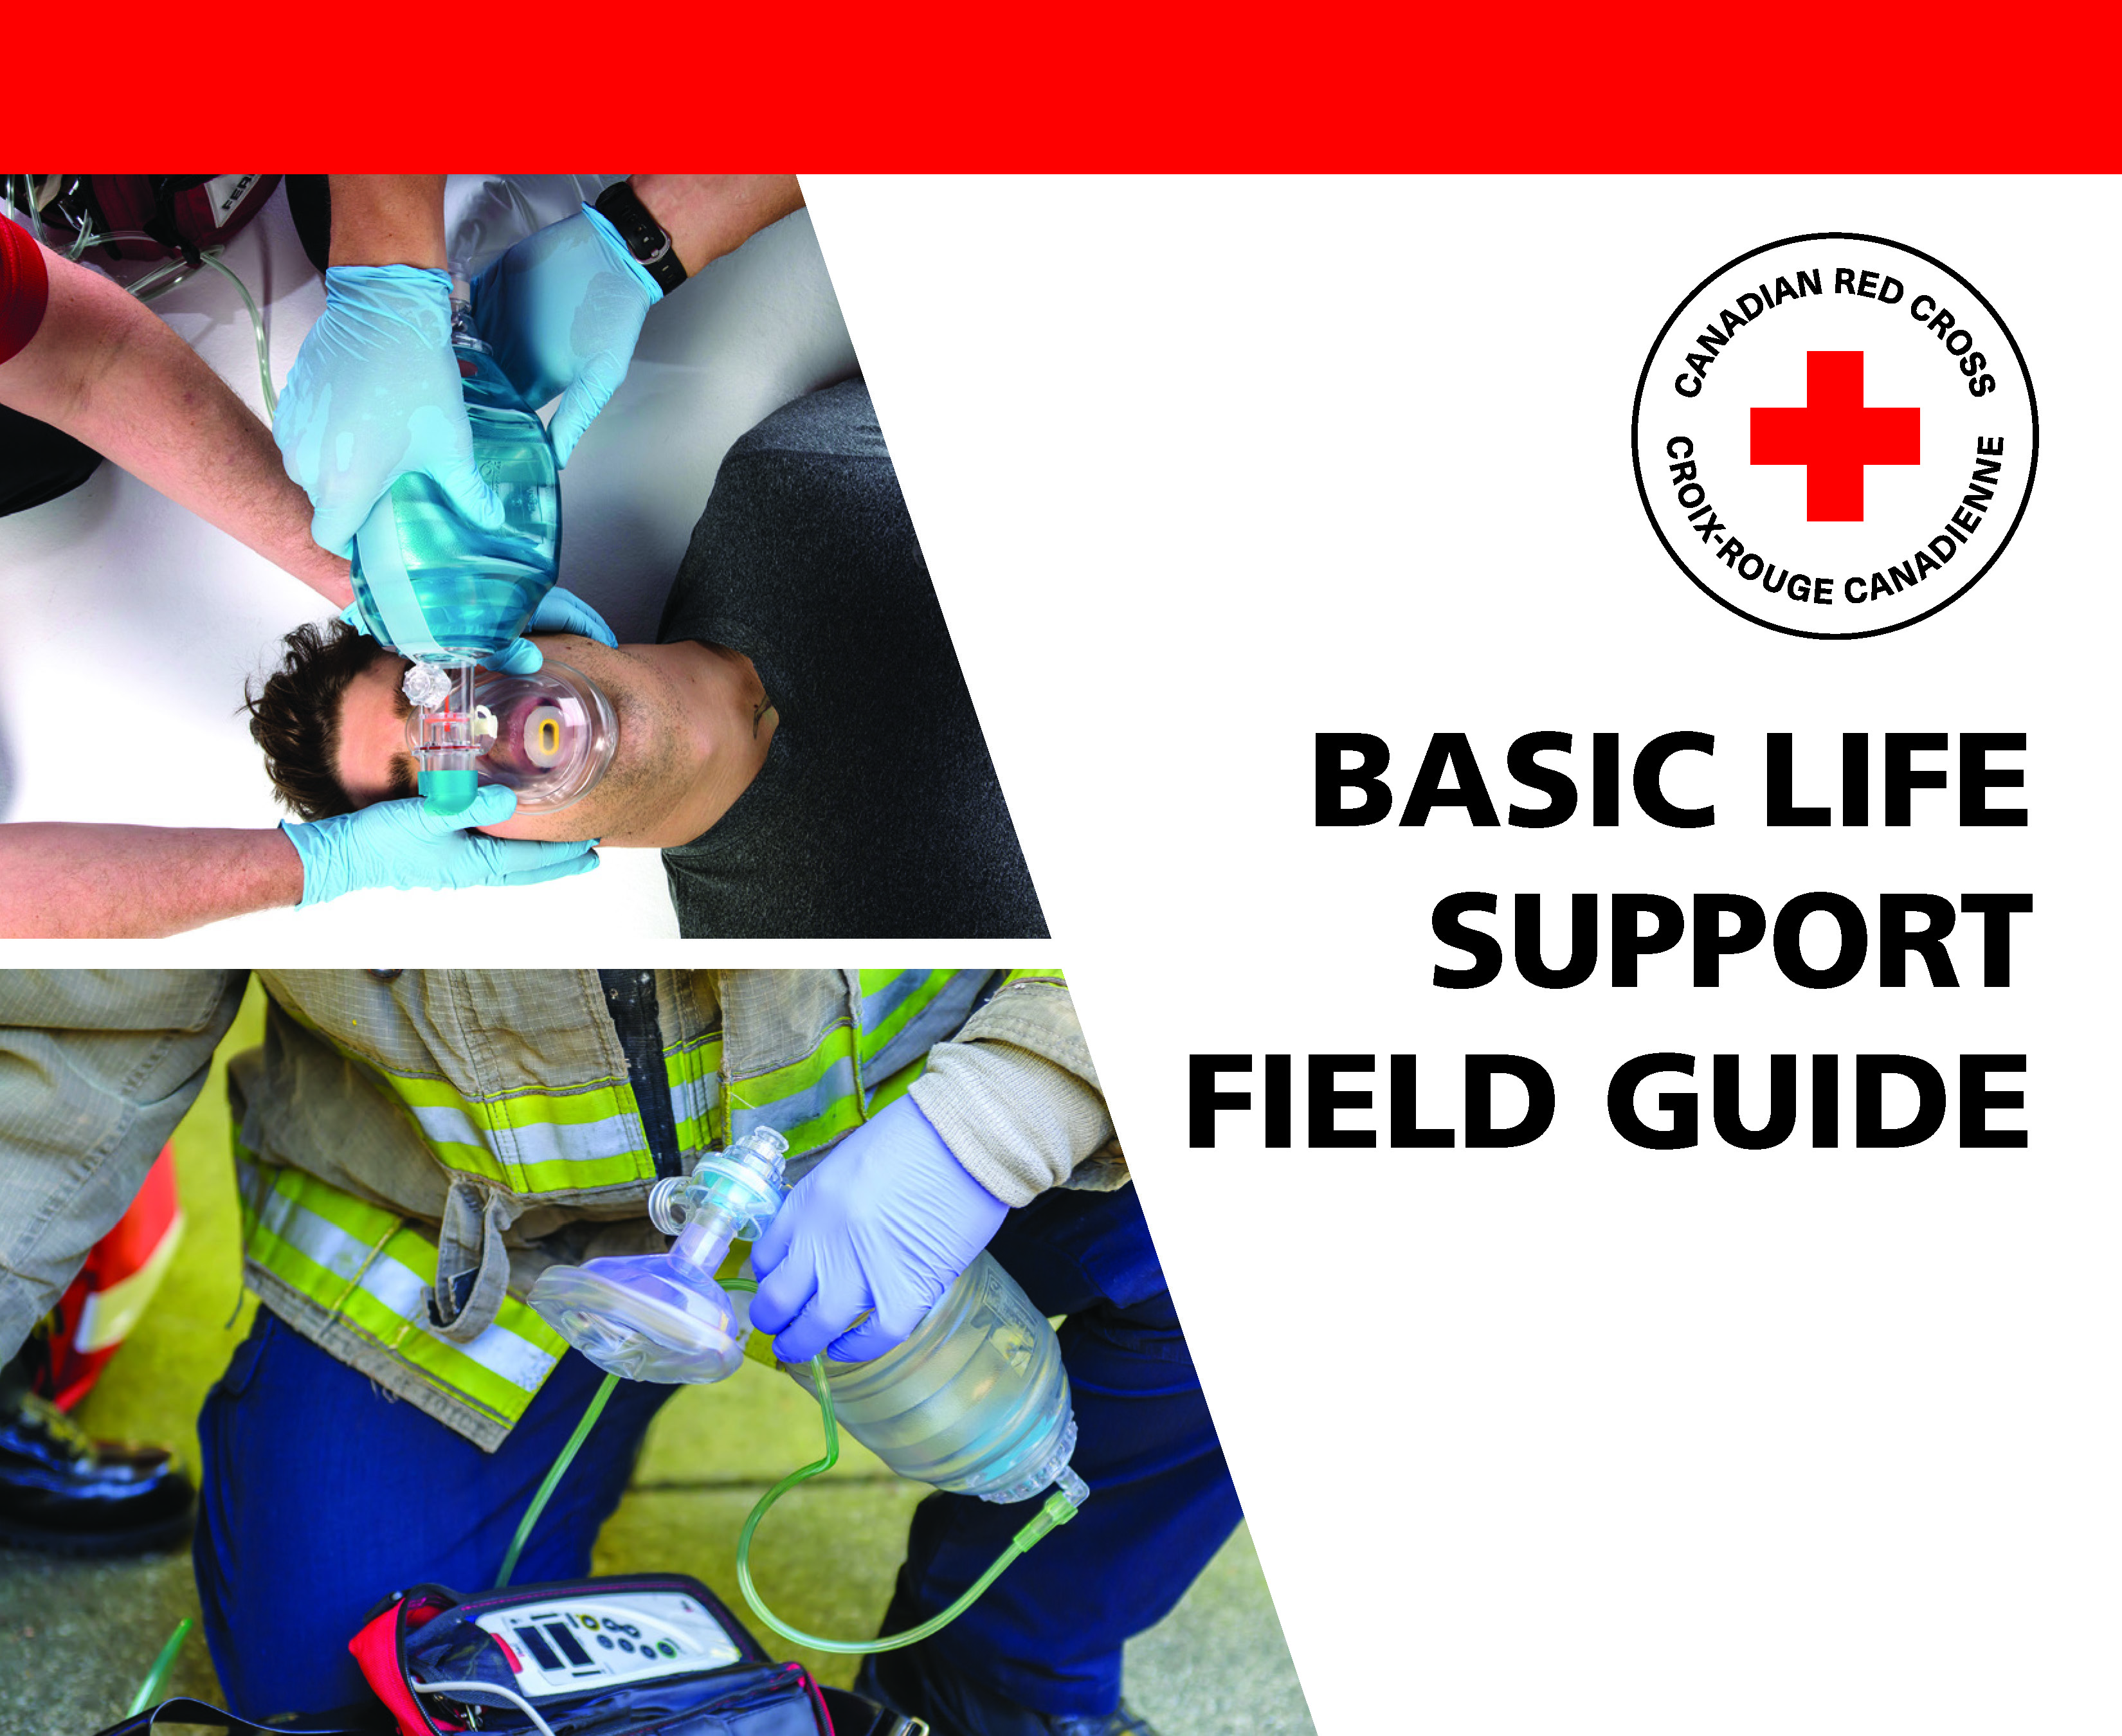 First Aid Course Materials for Basic Life Support in Vancouver